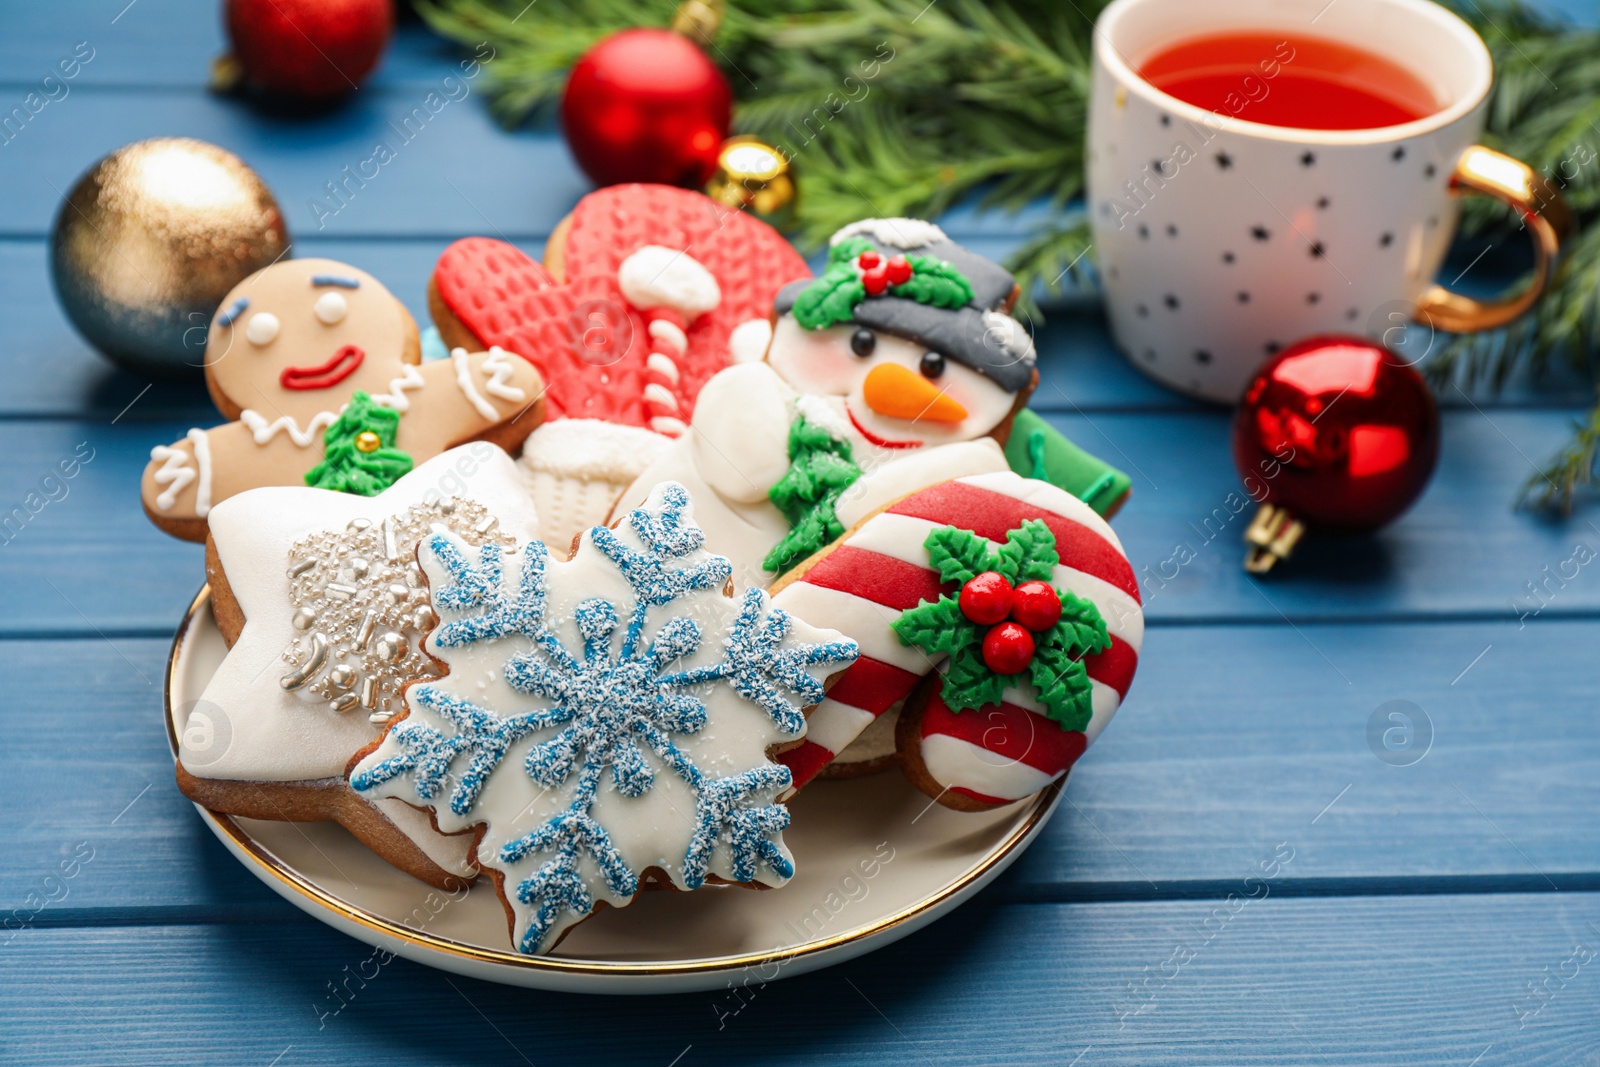 Photo of Delicious homemade Christmas cookies and festive decor on blue wooden table